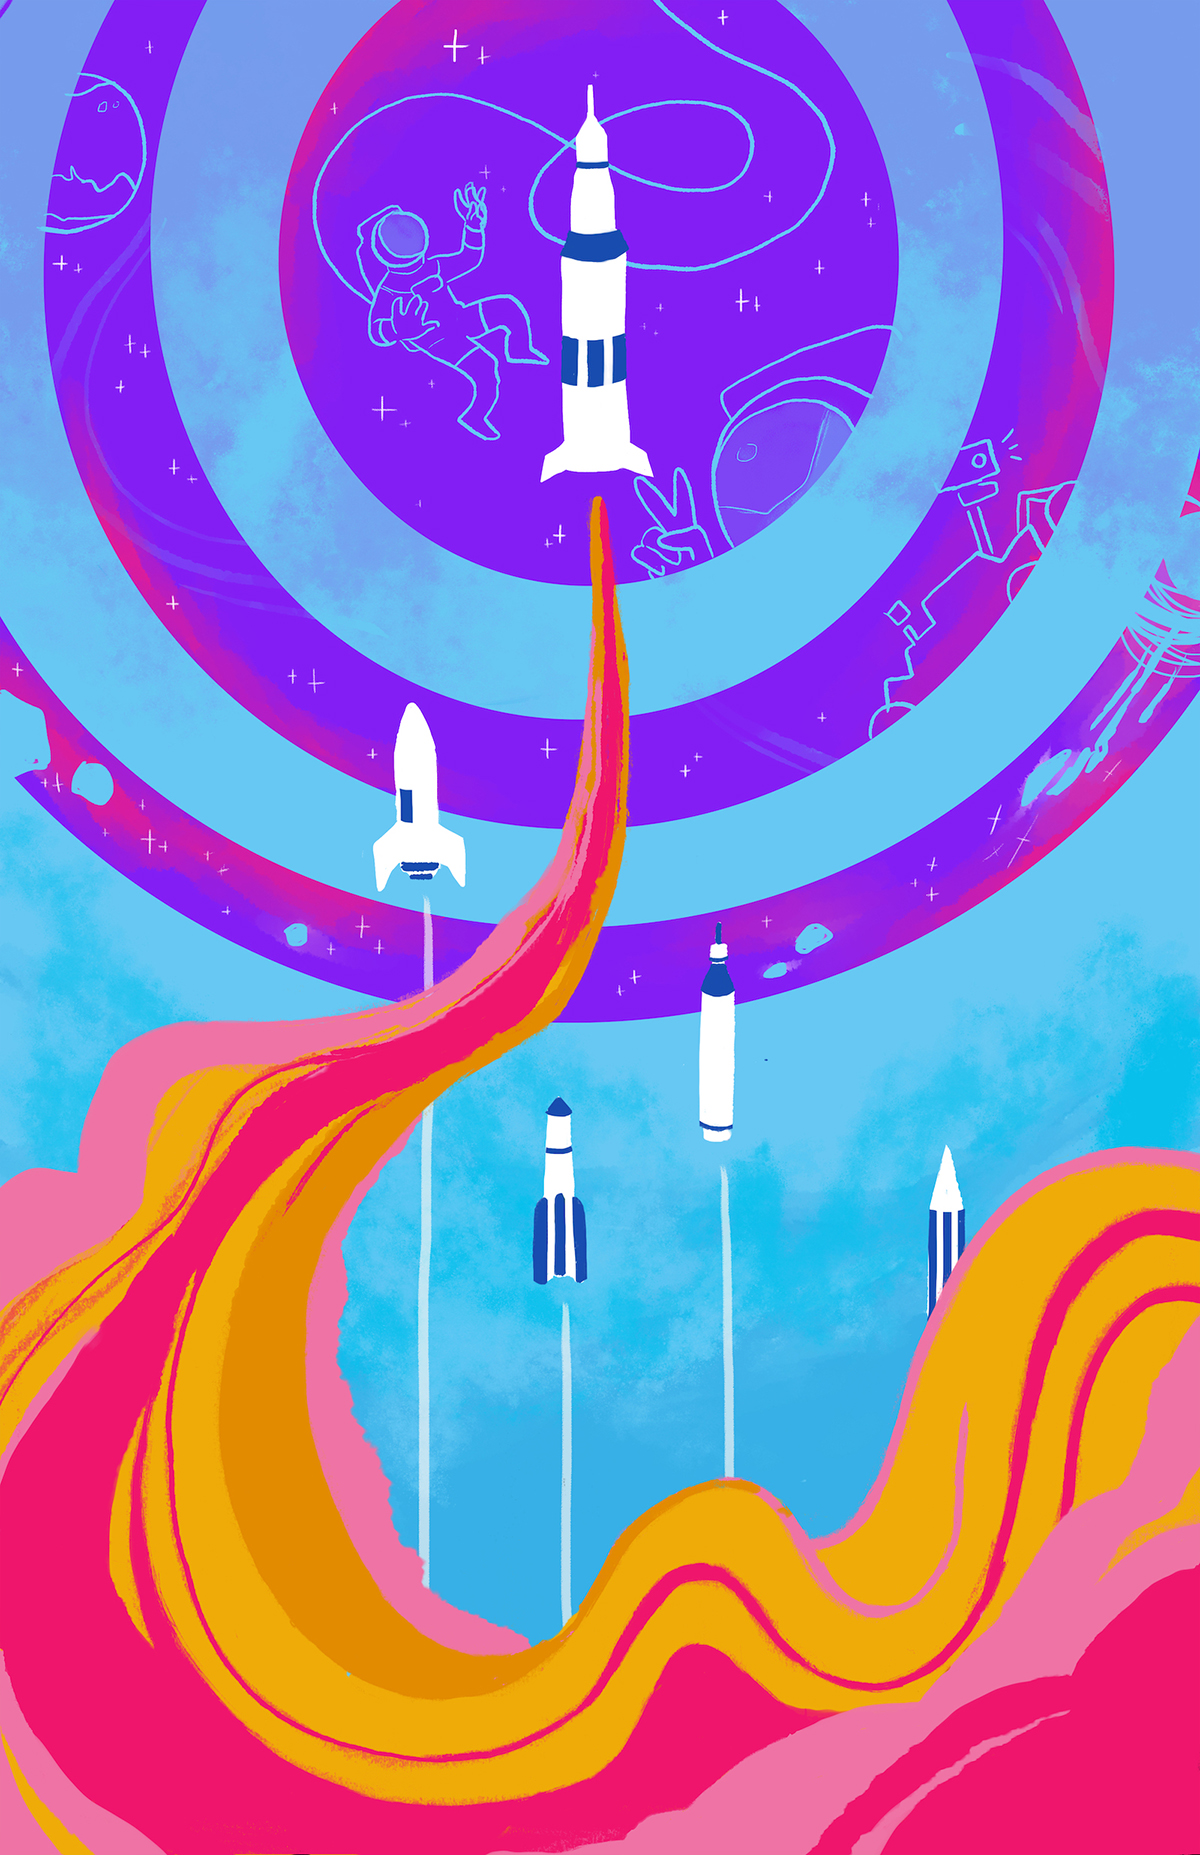 Bright graphic illustration of a space scene with five rockets shooting up to nested circles in the upper sky. Fire swirls out and down from central rocket